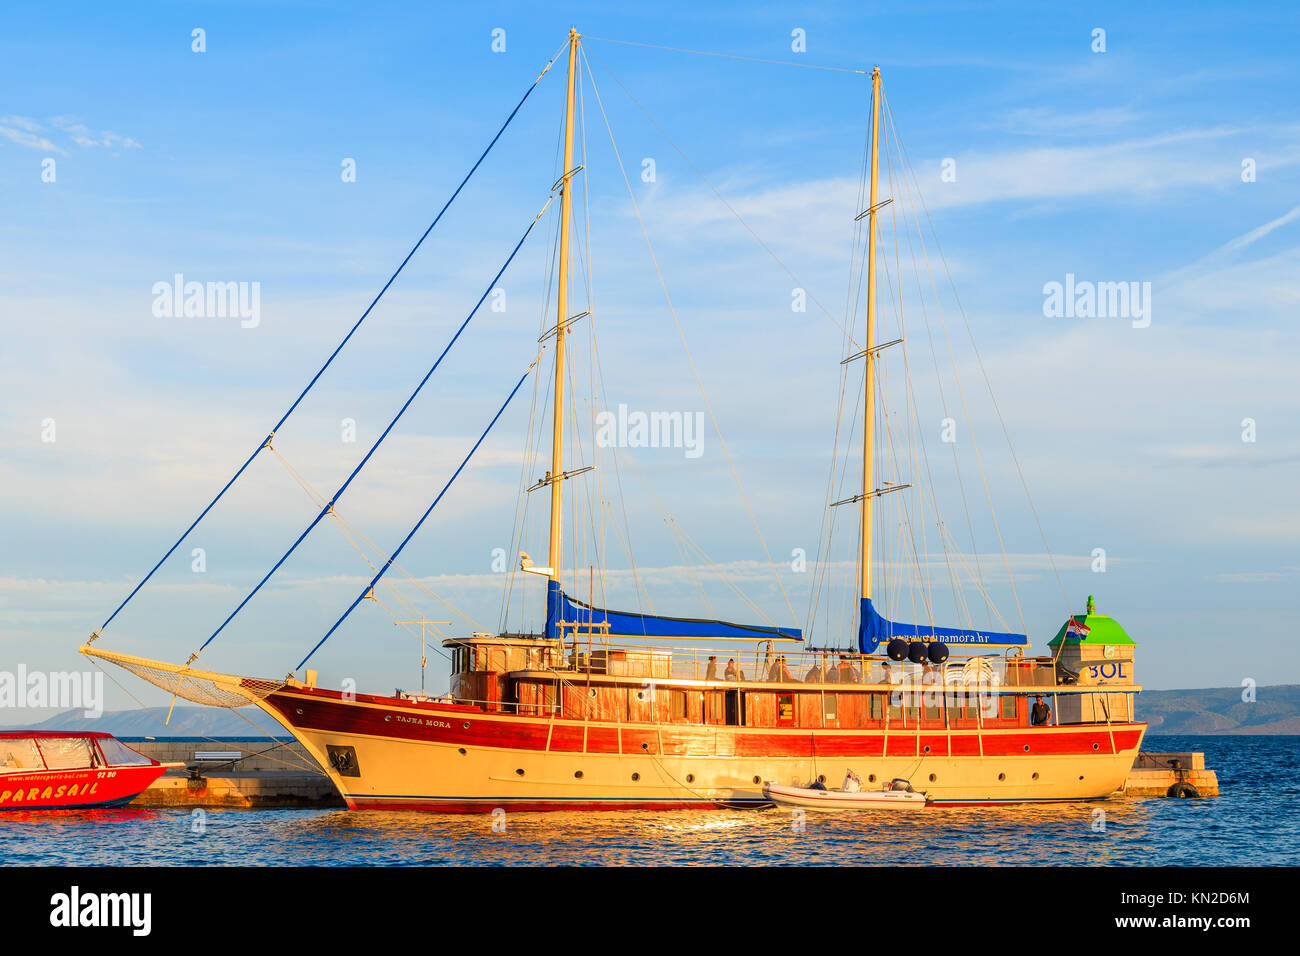 BOL TOWN, CROATIA - SEP 7, 2017: Traditional wooden yacht boat anchoring in Bol port at sunset time, Brac island, Croatia. Stock Photo